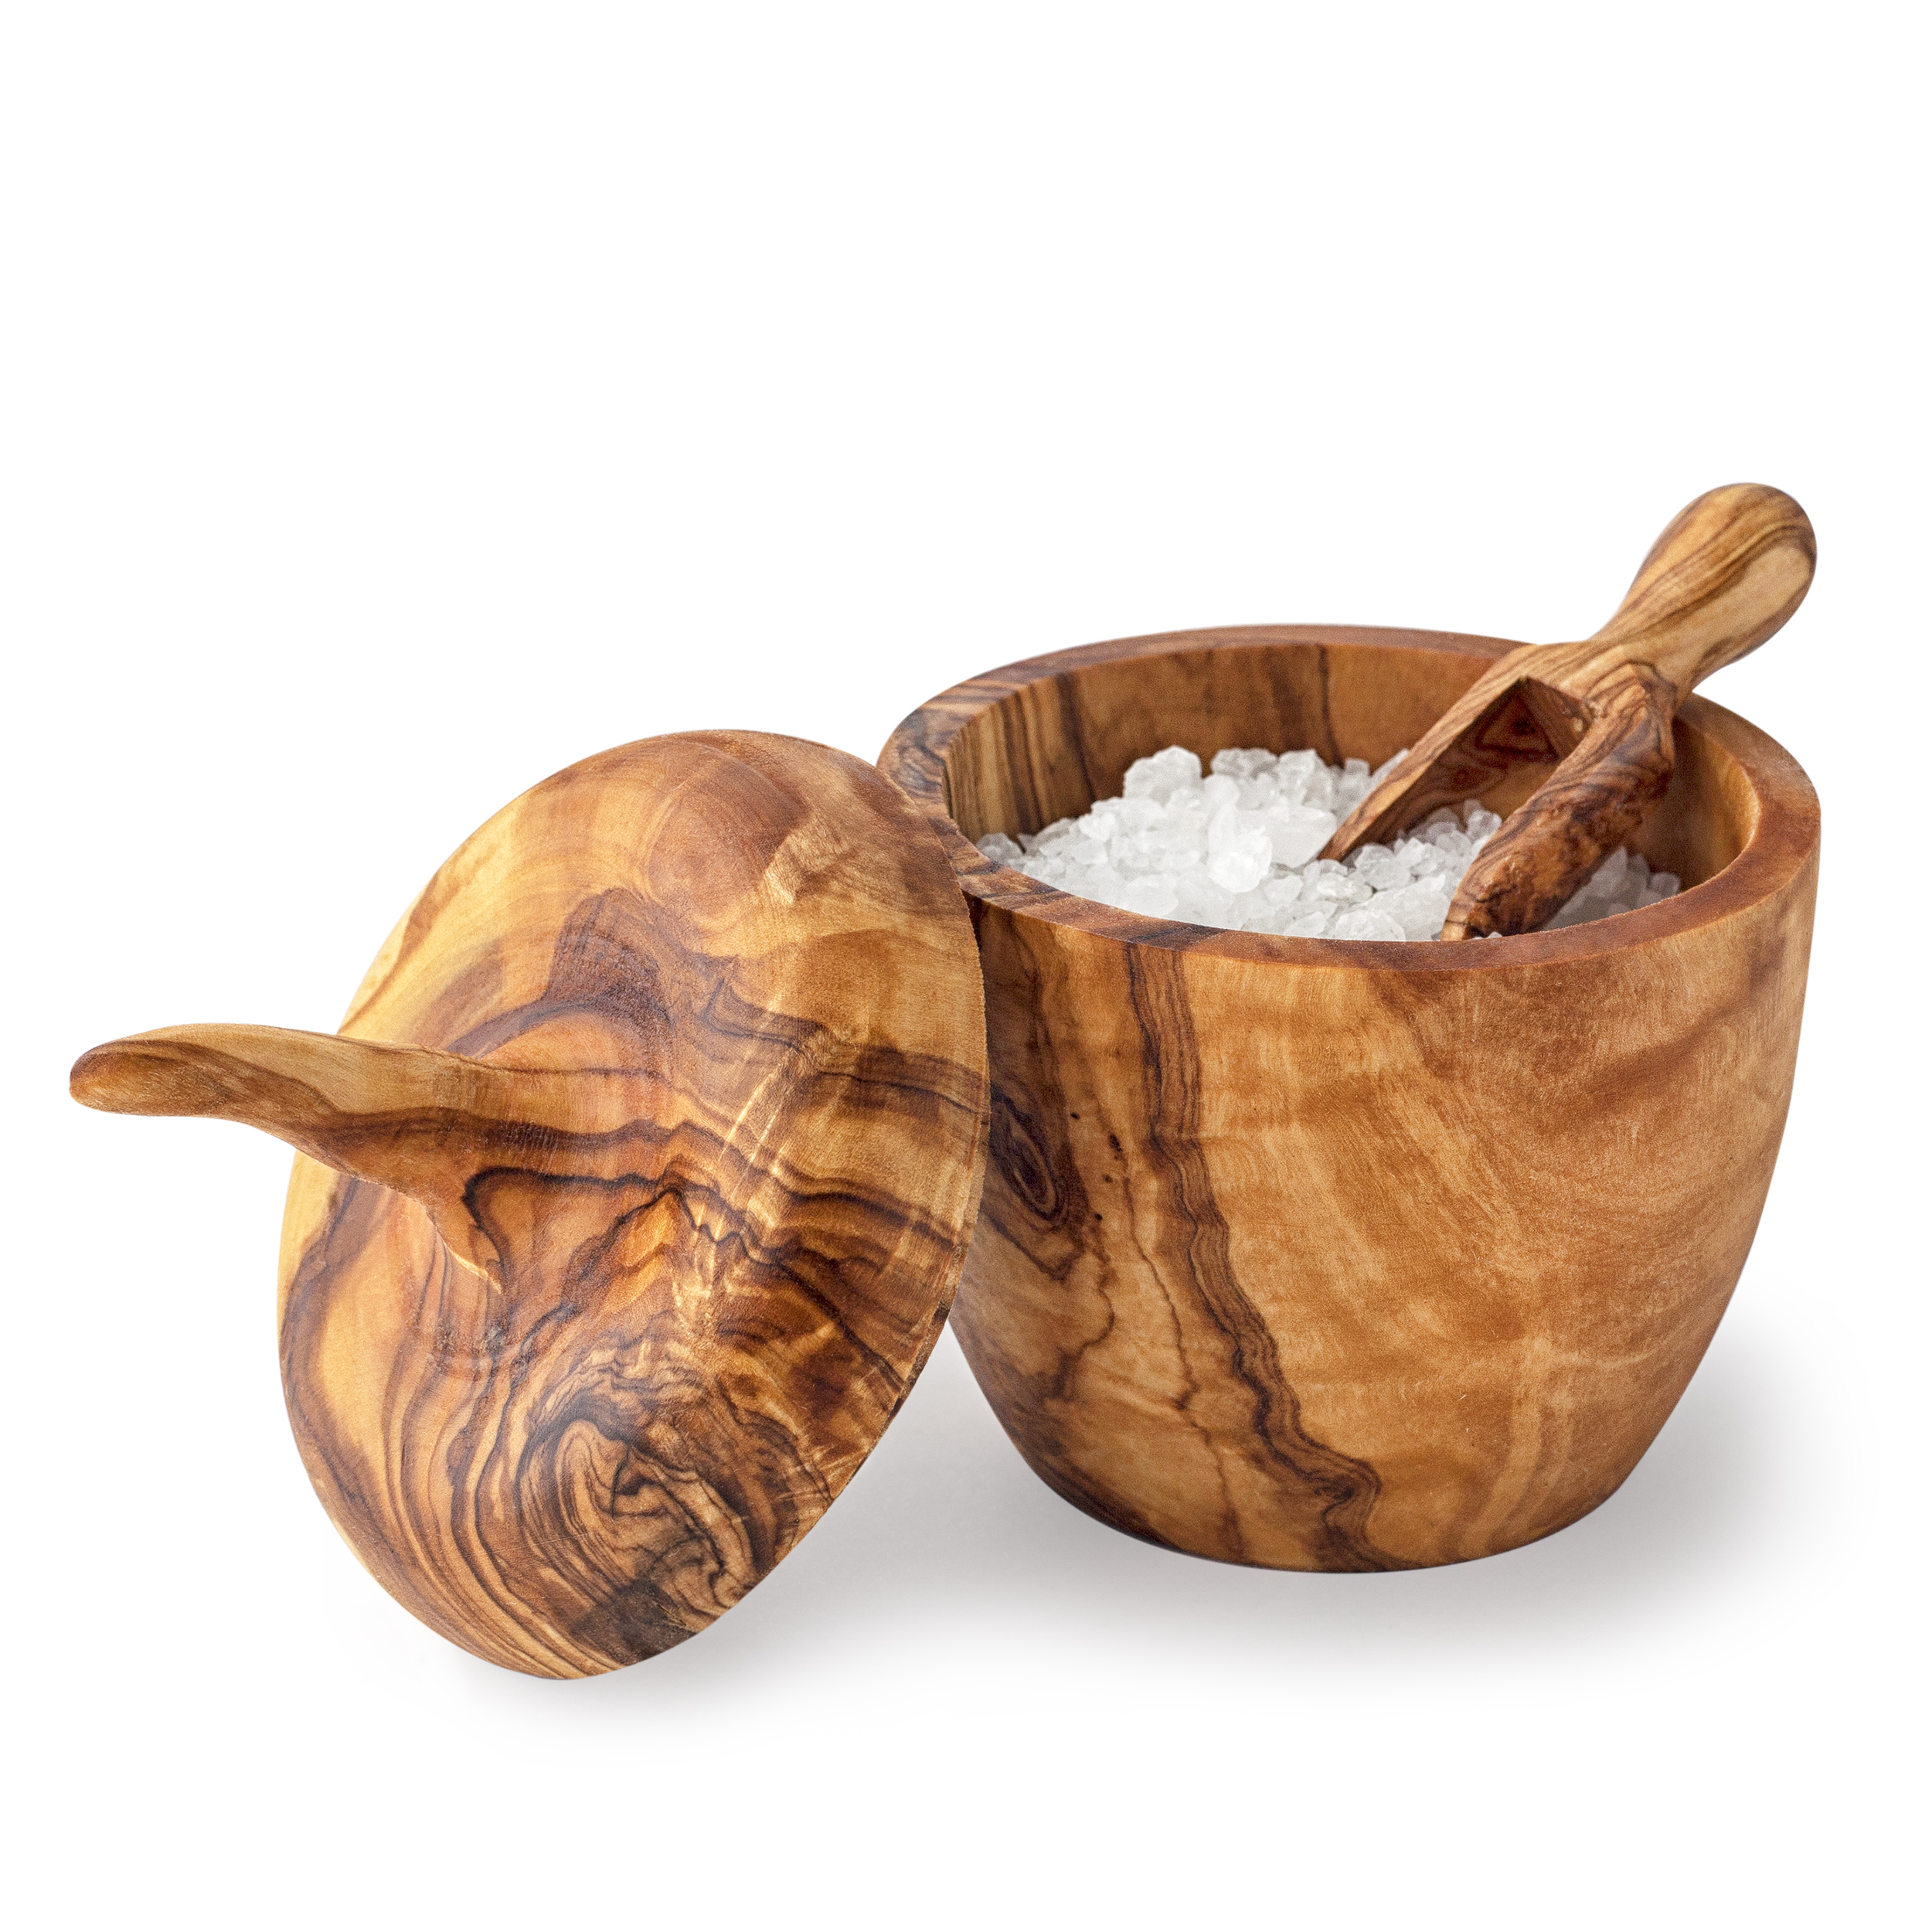 Handcrafted Olive Wood Bowl and Wooden Spoon - Forest Decor